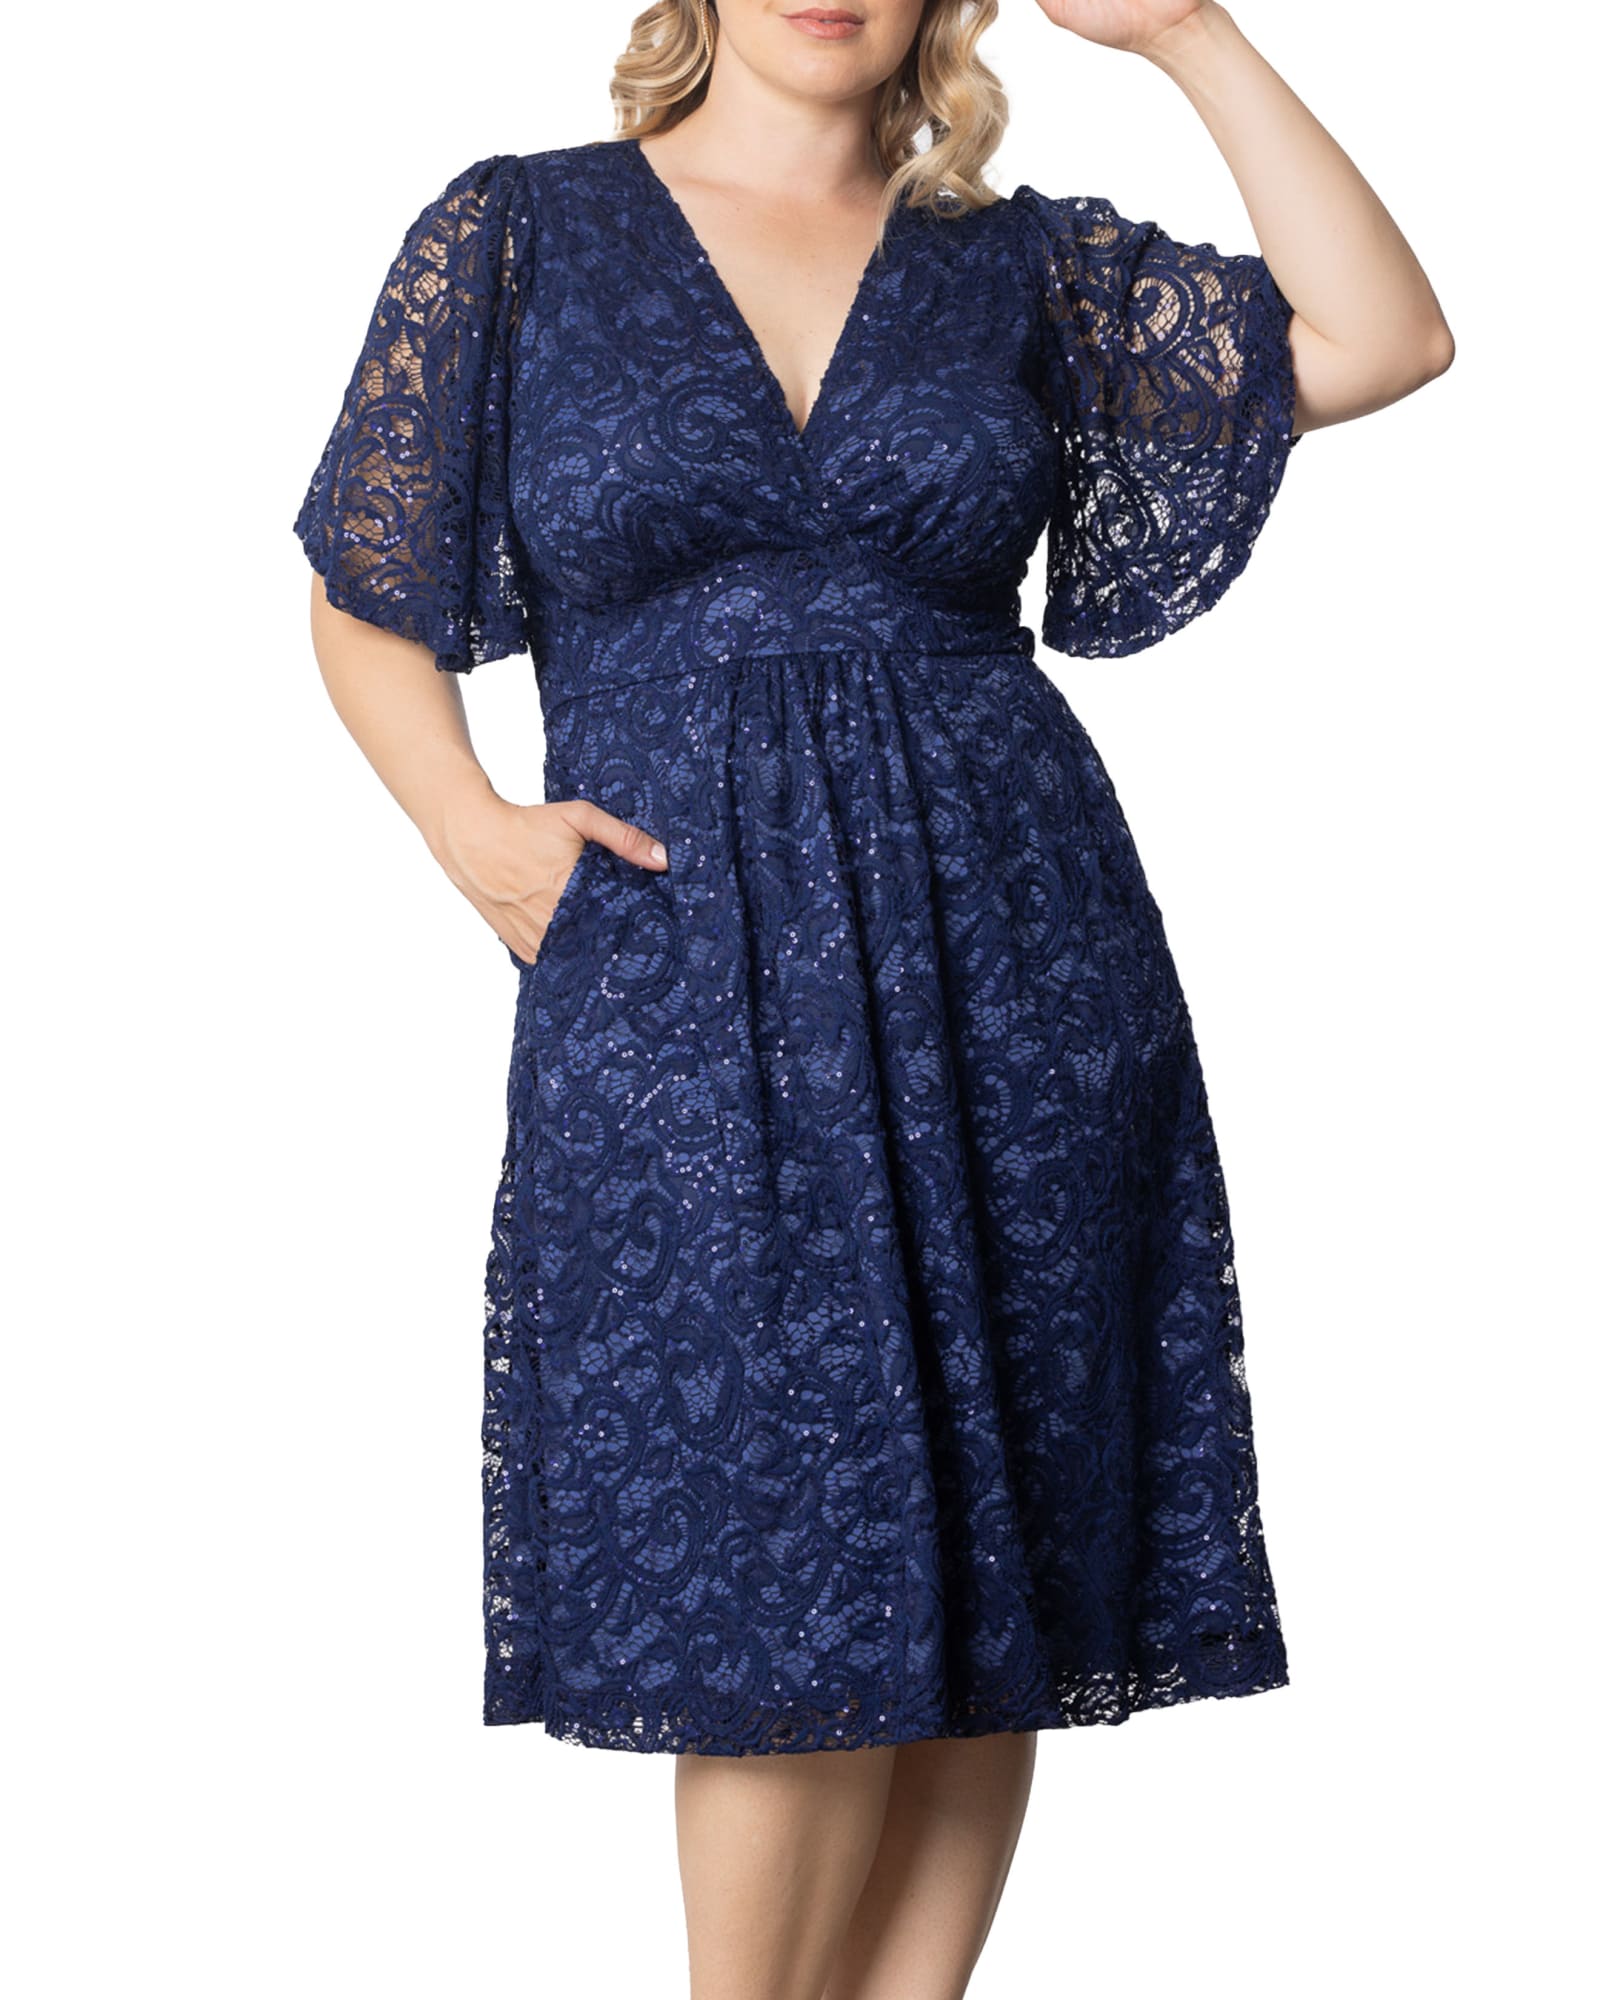 Starry Sequined Lace Cocktail Dress | NOCTURNAL NAVY